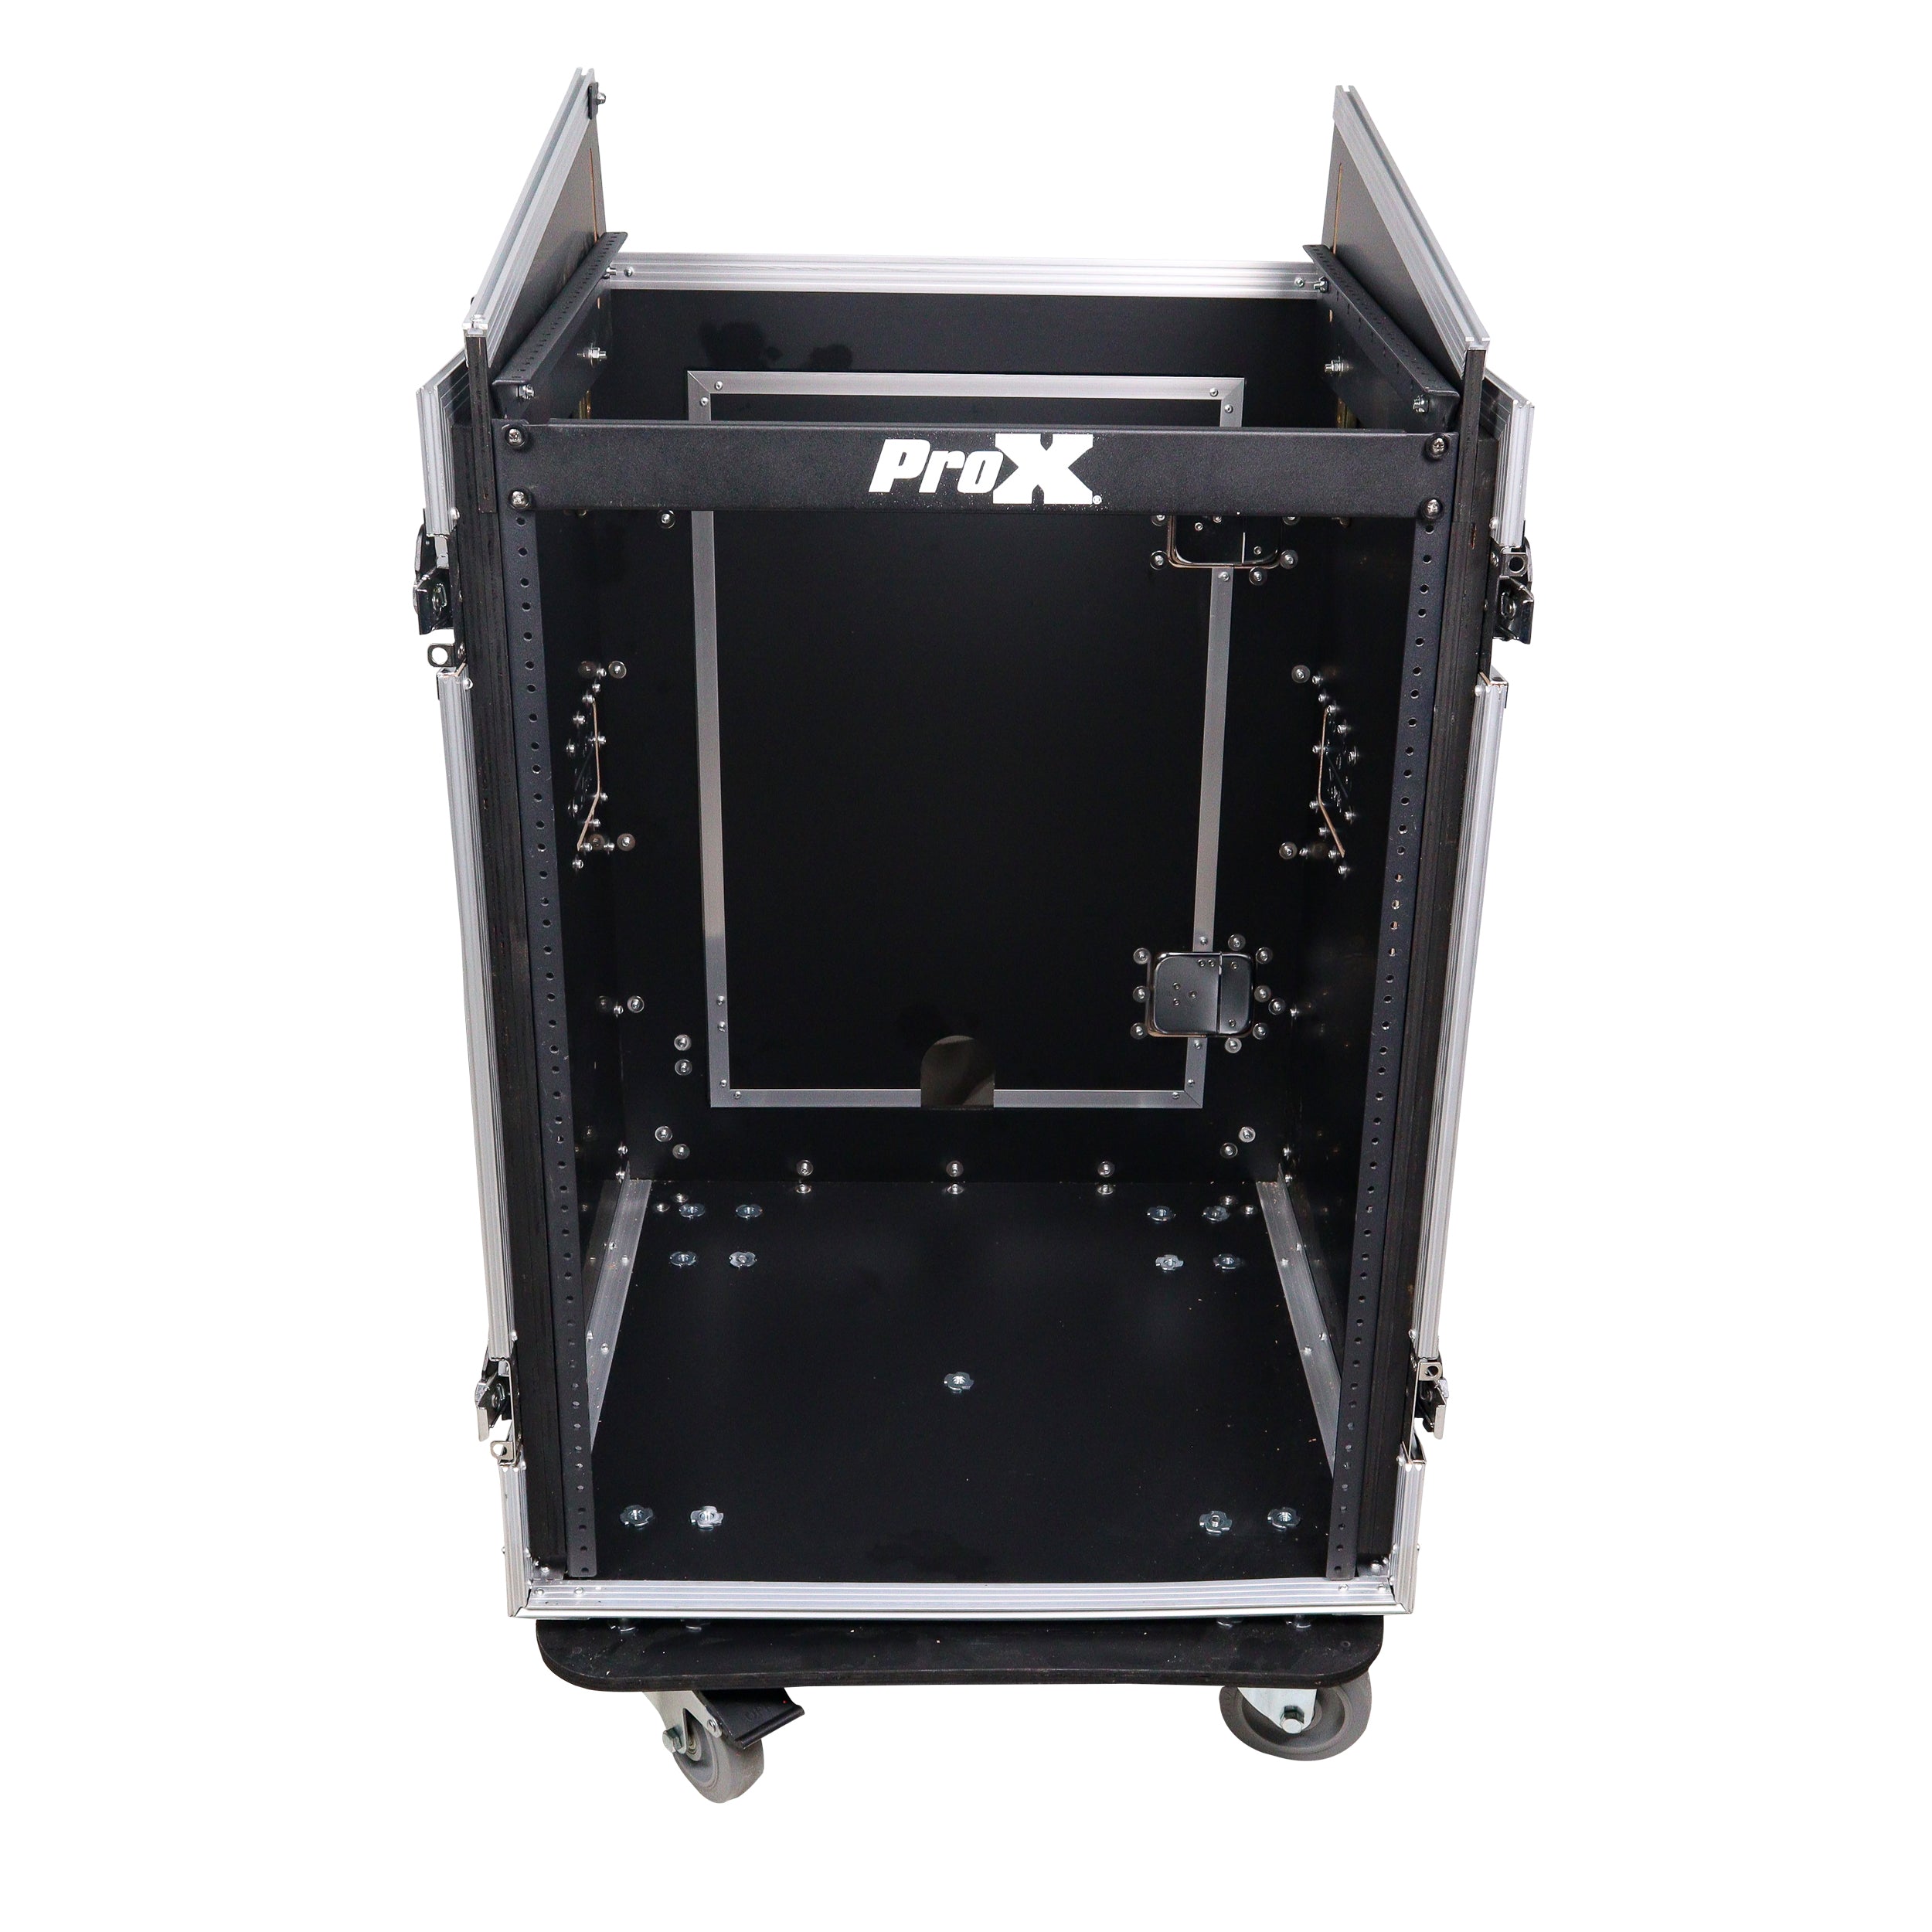 Pro X 16U Vertical Rack Mount Flight Case with 10U Top for Mixer Combo Amp Rack with Laptop Shelf and Caster Wheels T-16MR LT